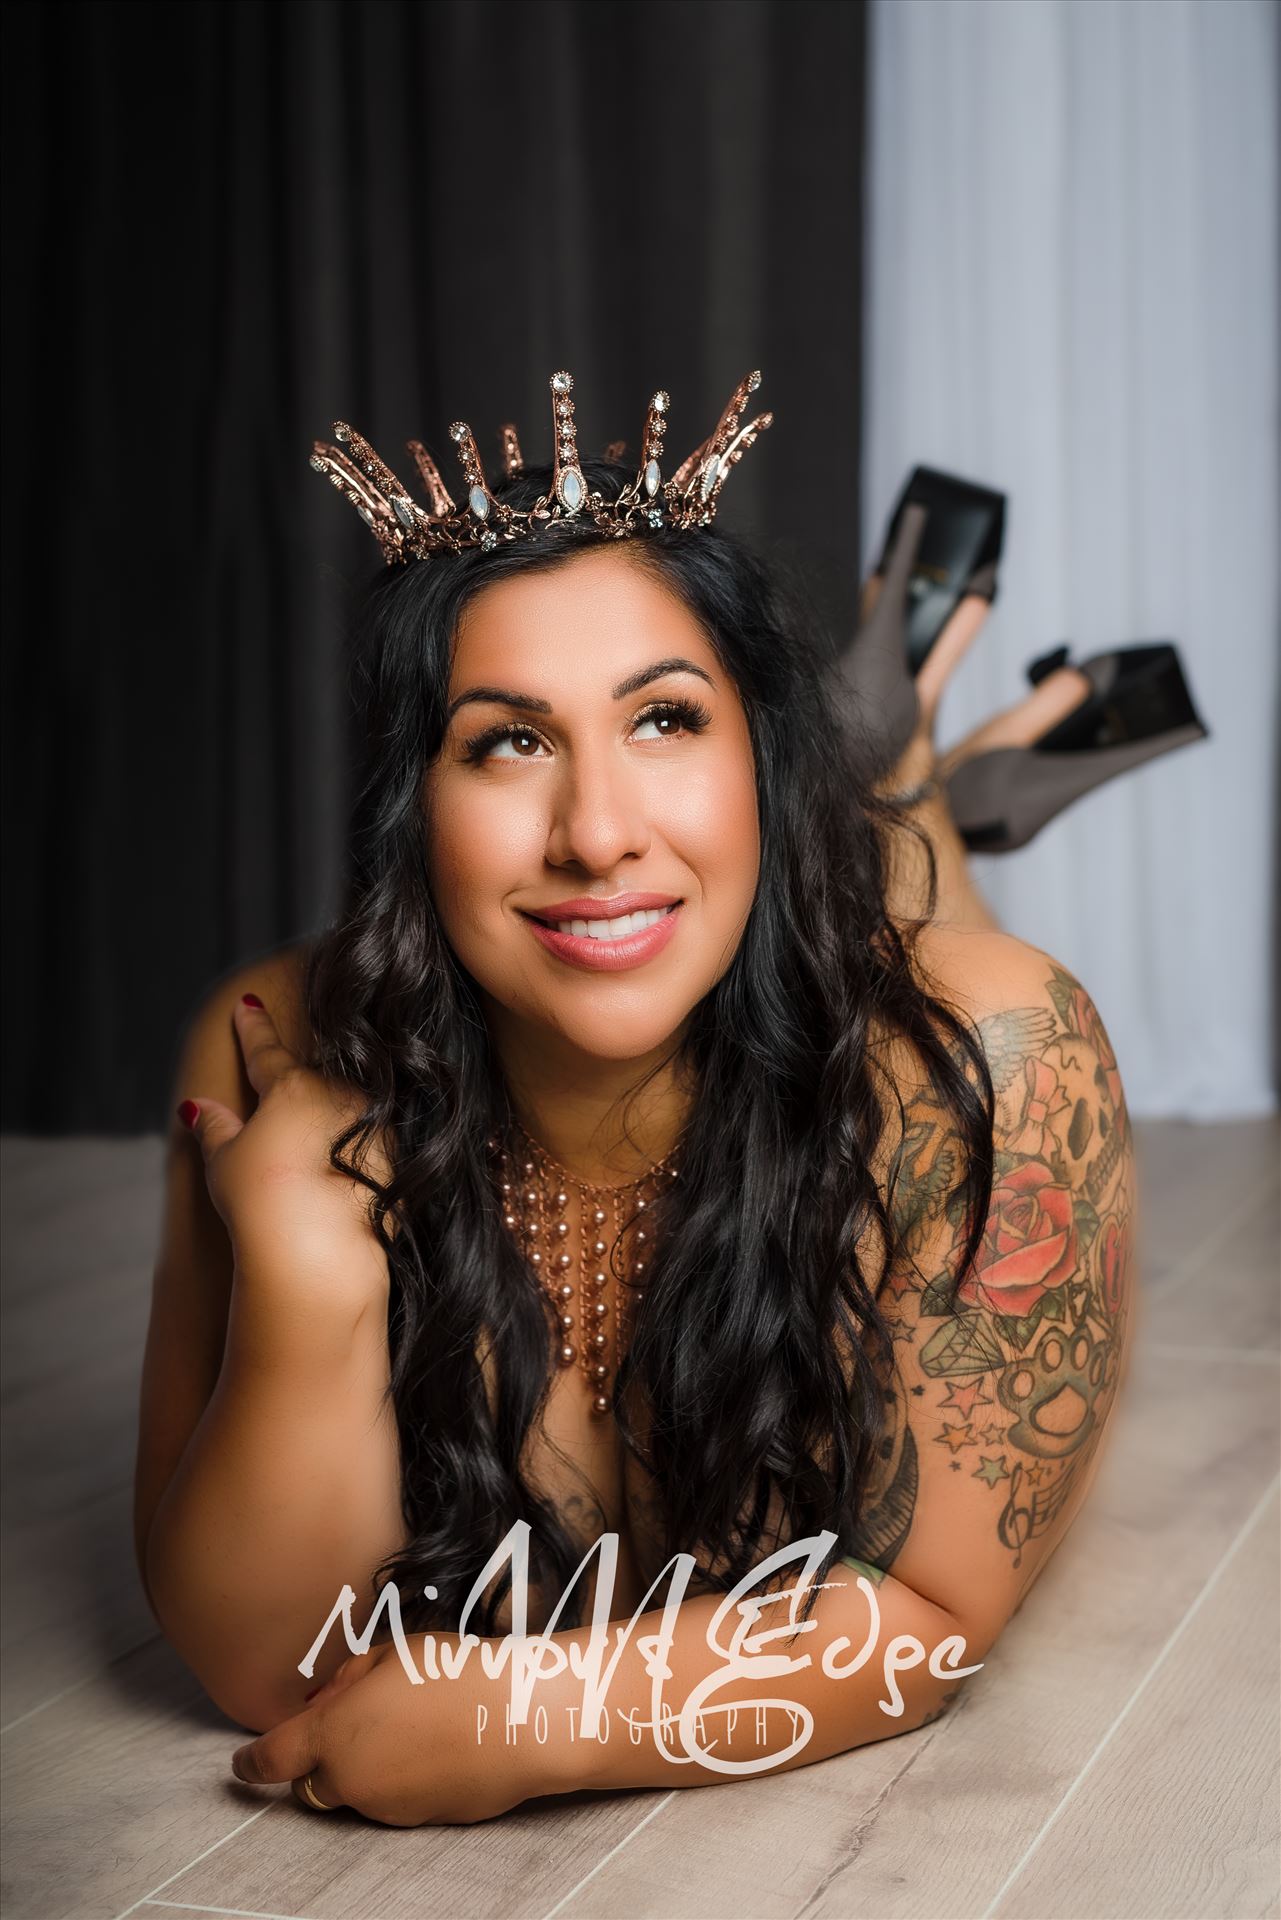 Port-9332.JPG - Beachfront Boudoir by Mirror's Edge Photography is a Boutique Luxury Boudoir Photography Studio located just blocks from the beach in Oceano, California. My mission is to show as many women as possible how beautiful they truly are! by Sarah Williams